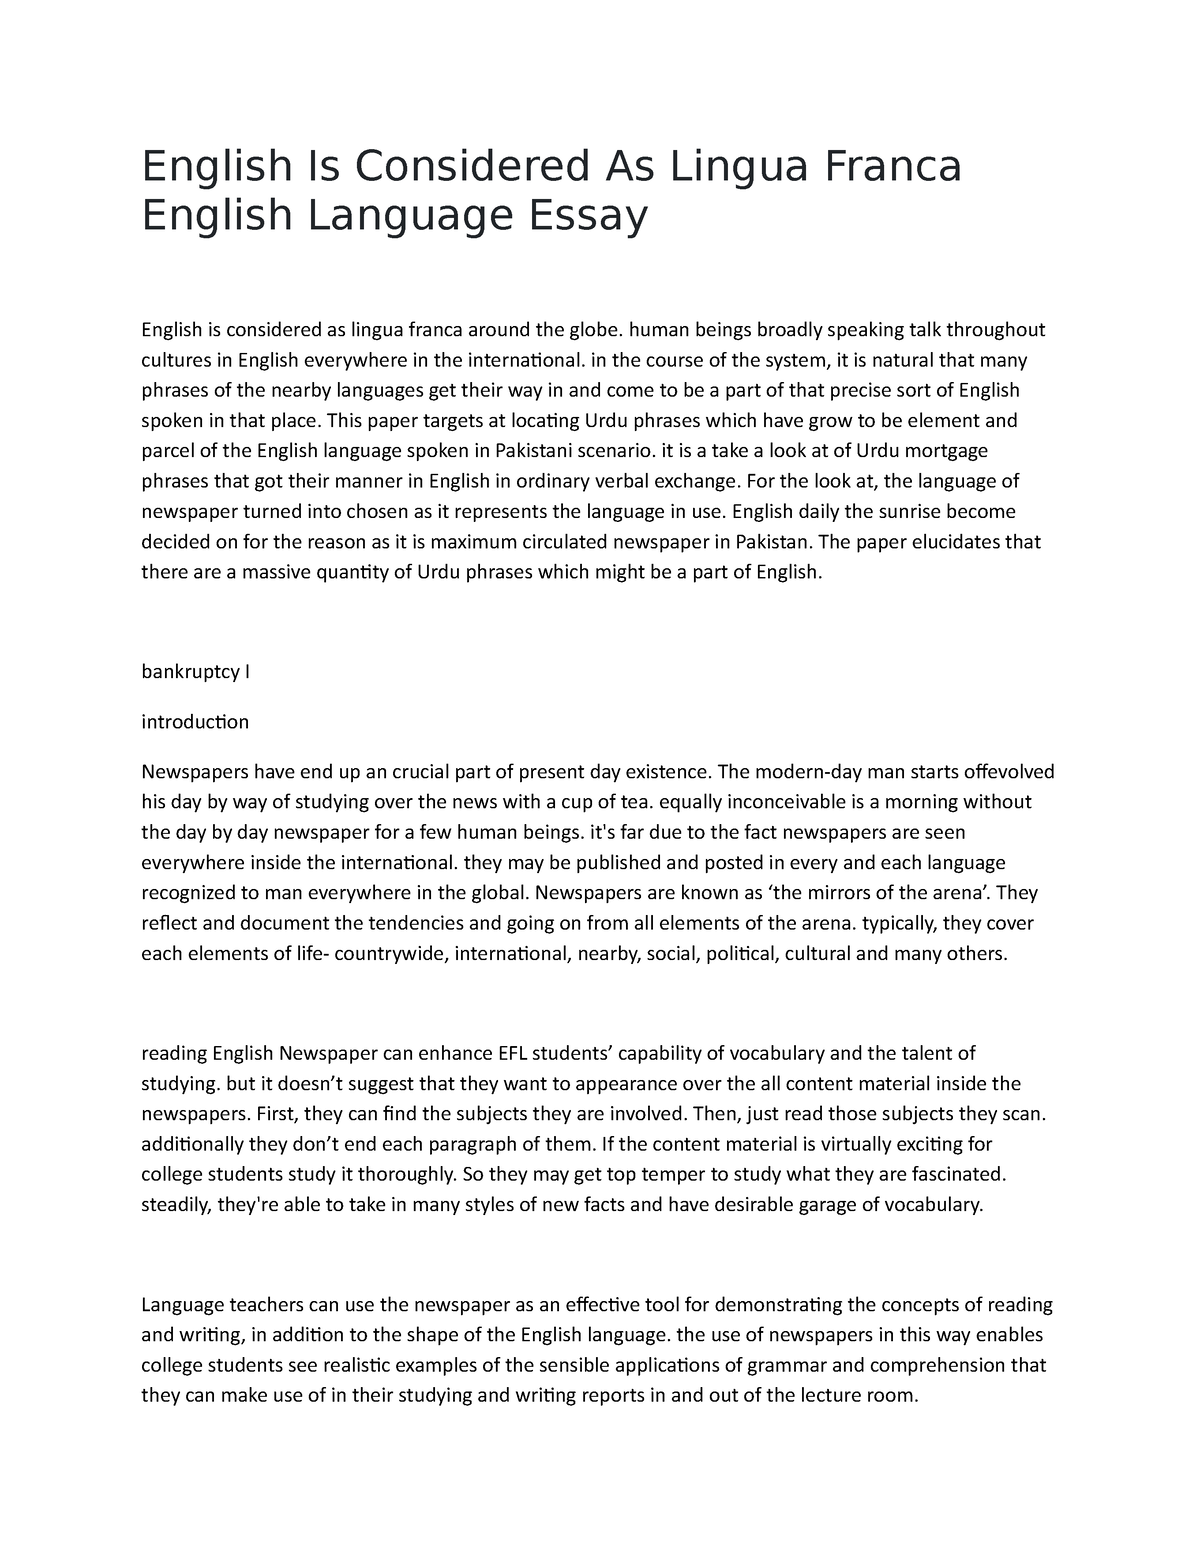 essay about english as a lingua franca